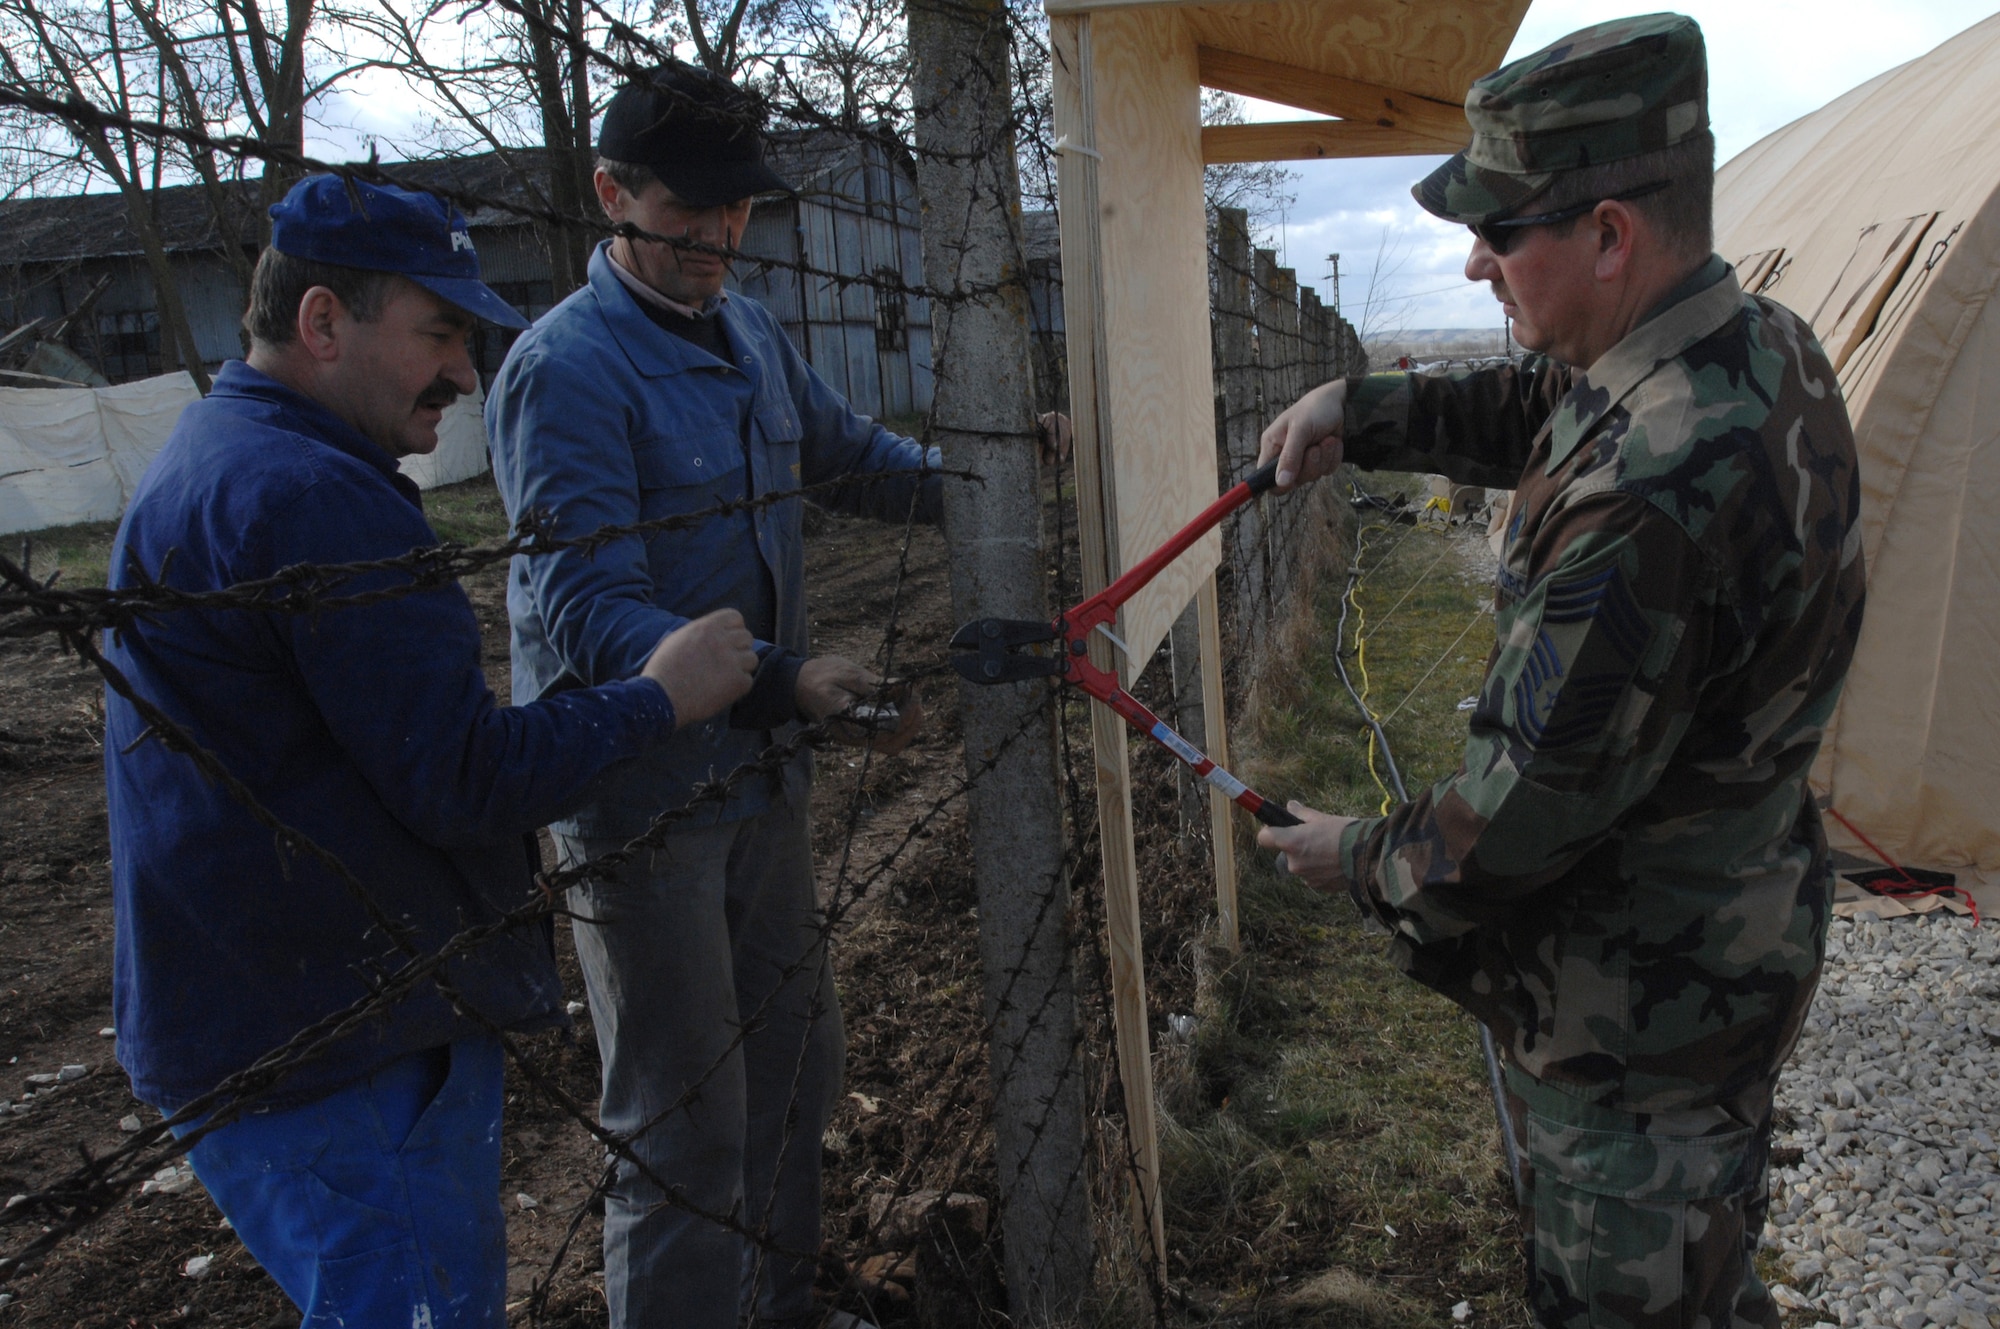 CAMPIA TURZII, Romania -- Chief Master Sgt. Terry Masters, chief of the 404 Expdentionary Air Base Squadron works with Romanian nationals in cutting the fence bewteen the Romanian base and tent city here March 24, 2008. The deployed civil engineering team built an entire tent city here in 96 hours to support U.S. operations at the air base.  The Airmen are part of a team which is augmenting NATO forces in securing the airspace around Bucharest, Romania, for the NATO Summit April 2-4,  (U.S Air Force photo by Senior Airman Teresa M. Hawkins)
